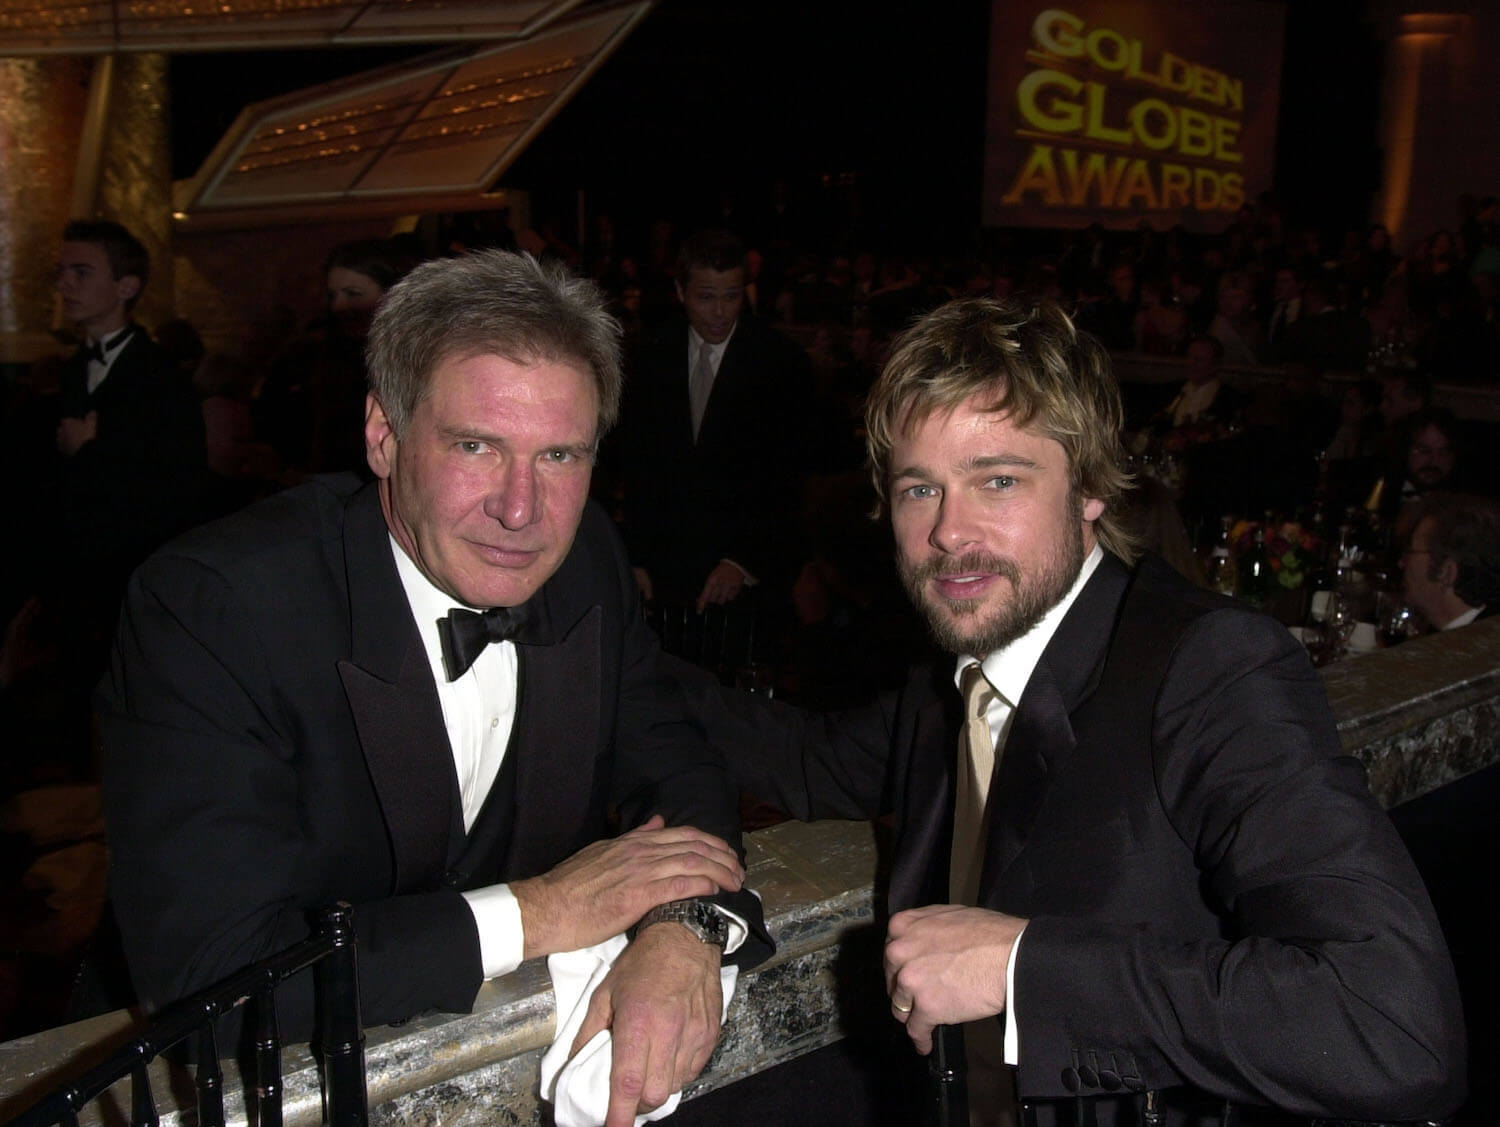 Harrison Ford and Brad Pitt in suits sitting across from each other